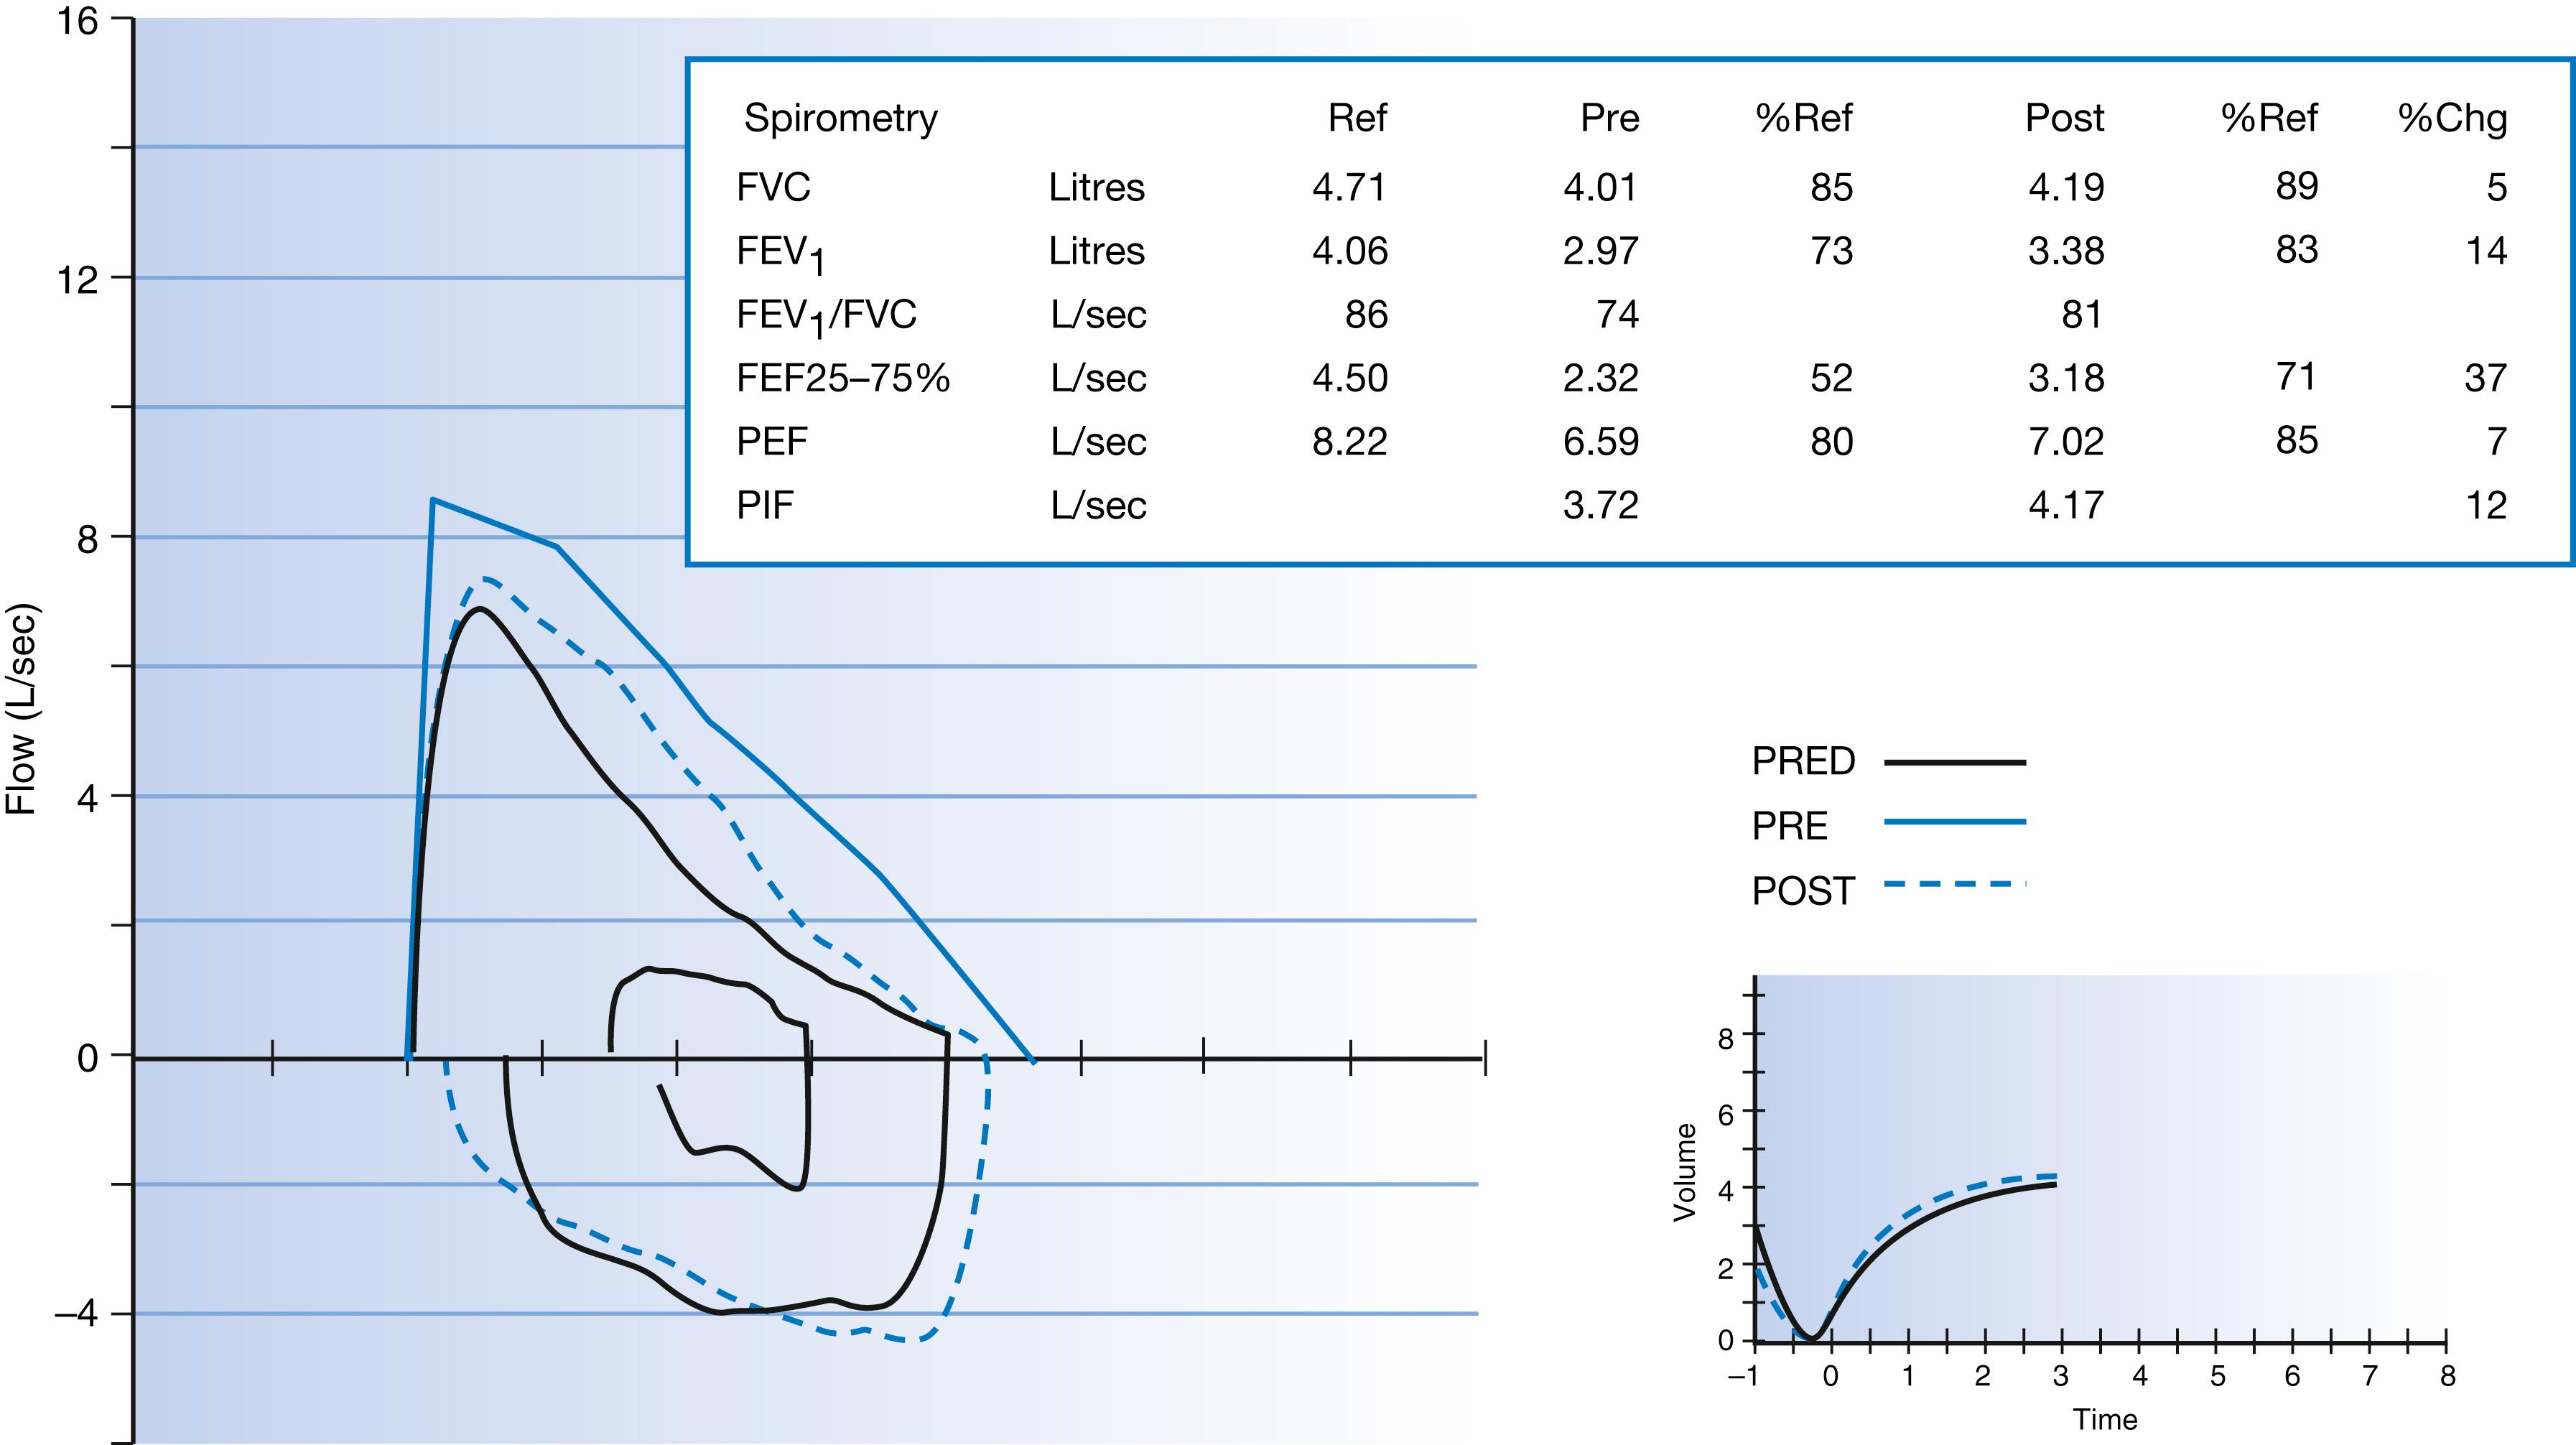 Fig. 4.2, Spirometry demonstrating a scooped flow volume loop seen in obstructive disease in asthma. Following bronchodilator use (PRED, predicted), there is a positive bronchodilator response of >12% in forced expiratory volume in 1 second (FEV 1 ). FEF, forced expiratory flow rate; FVC, forced vital capacity; PEF, peak expiratory flow rate; PIF, peak inspiratory flow rate.